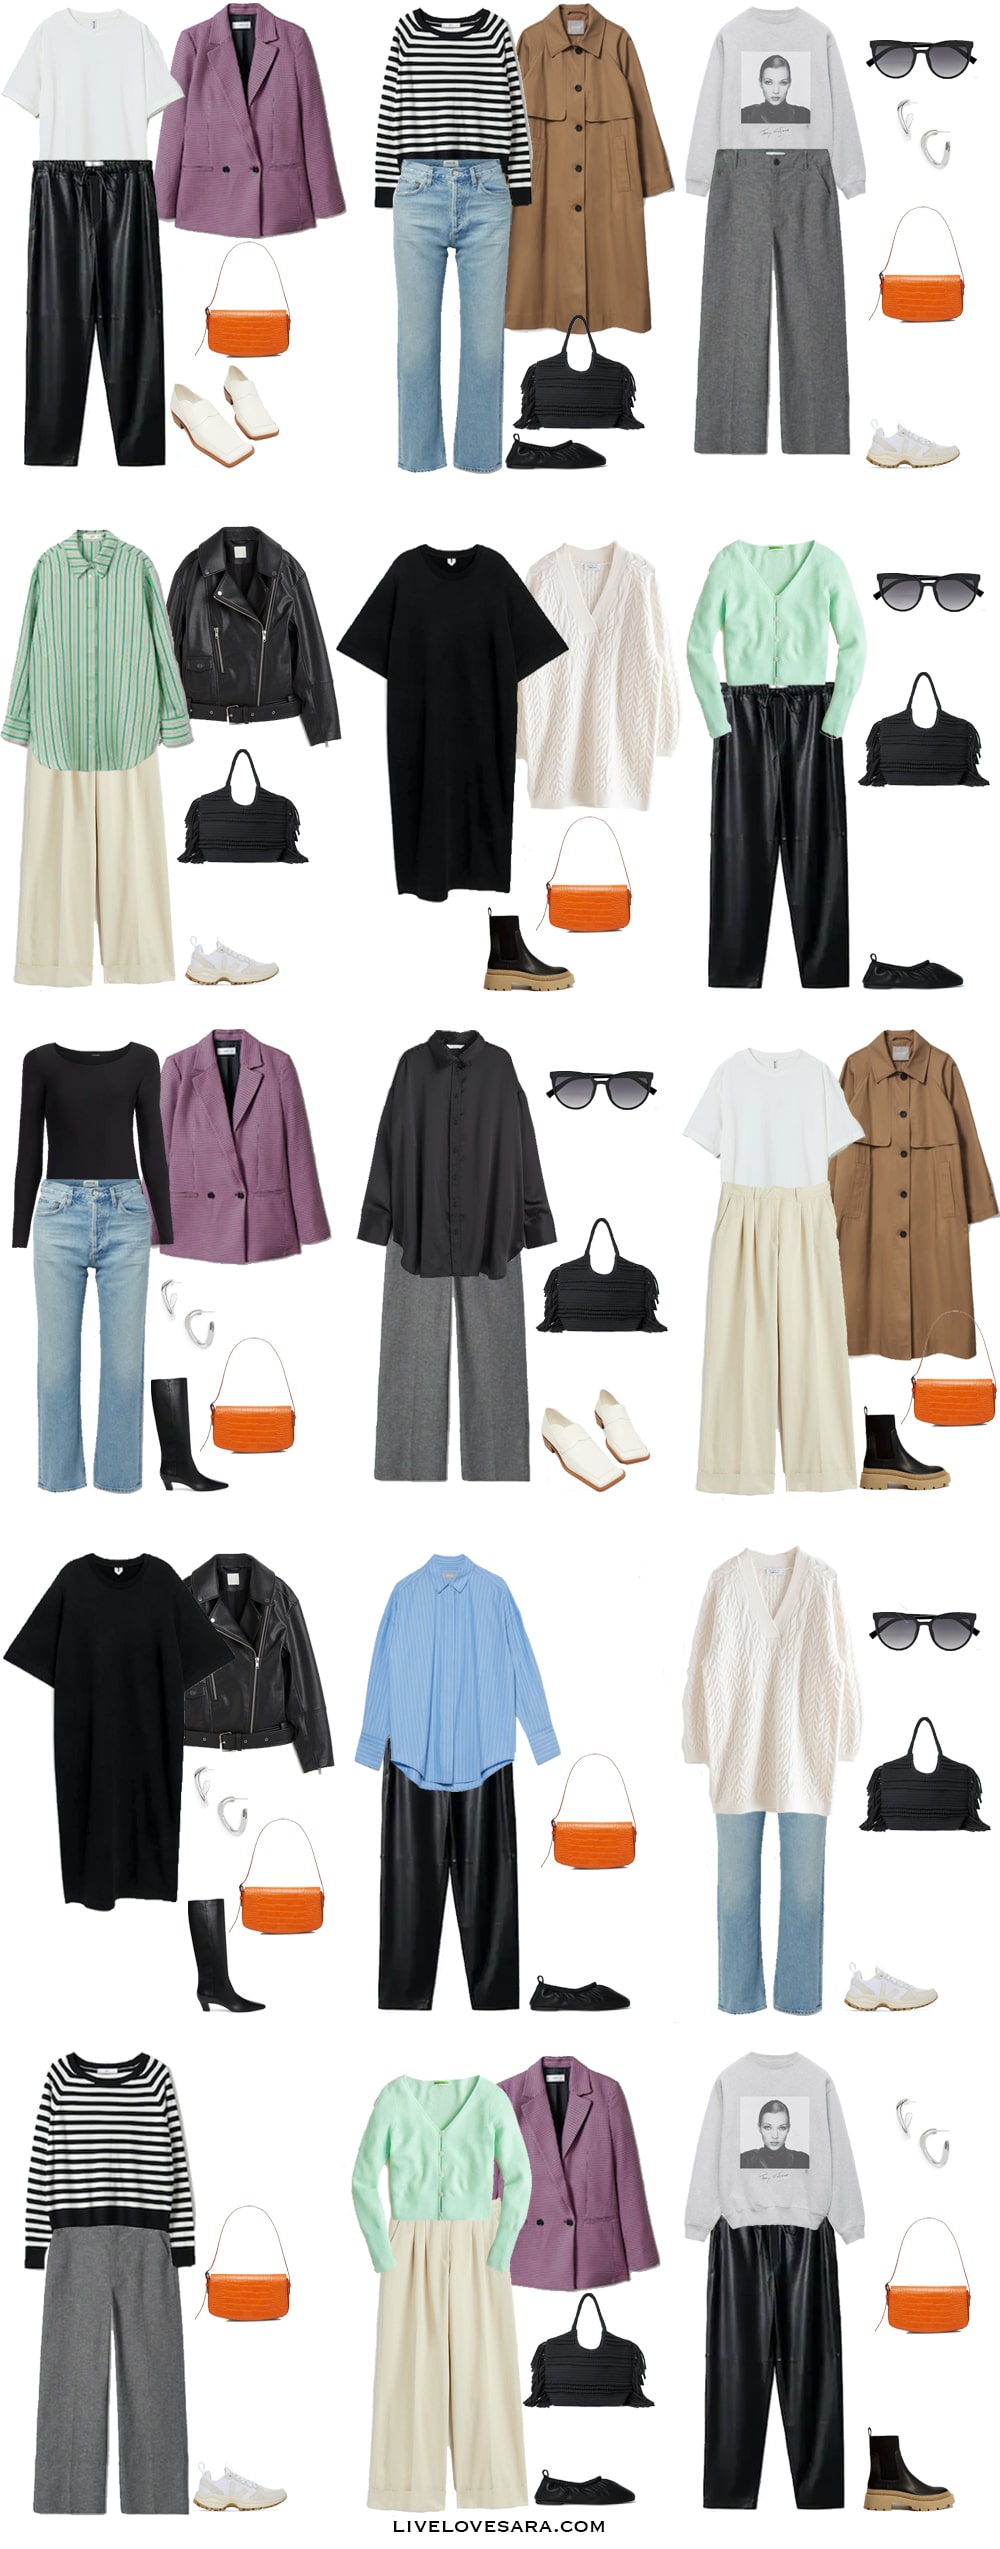 A white background with outfits 1-15 built from the spring capsule wardrobe for 2022.